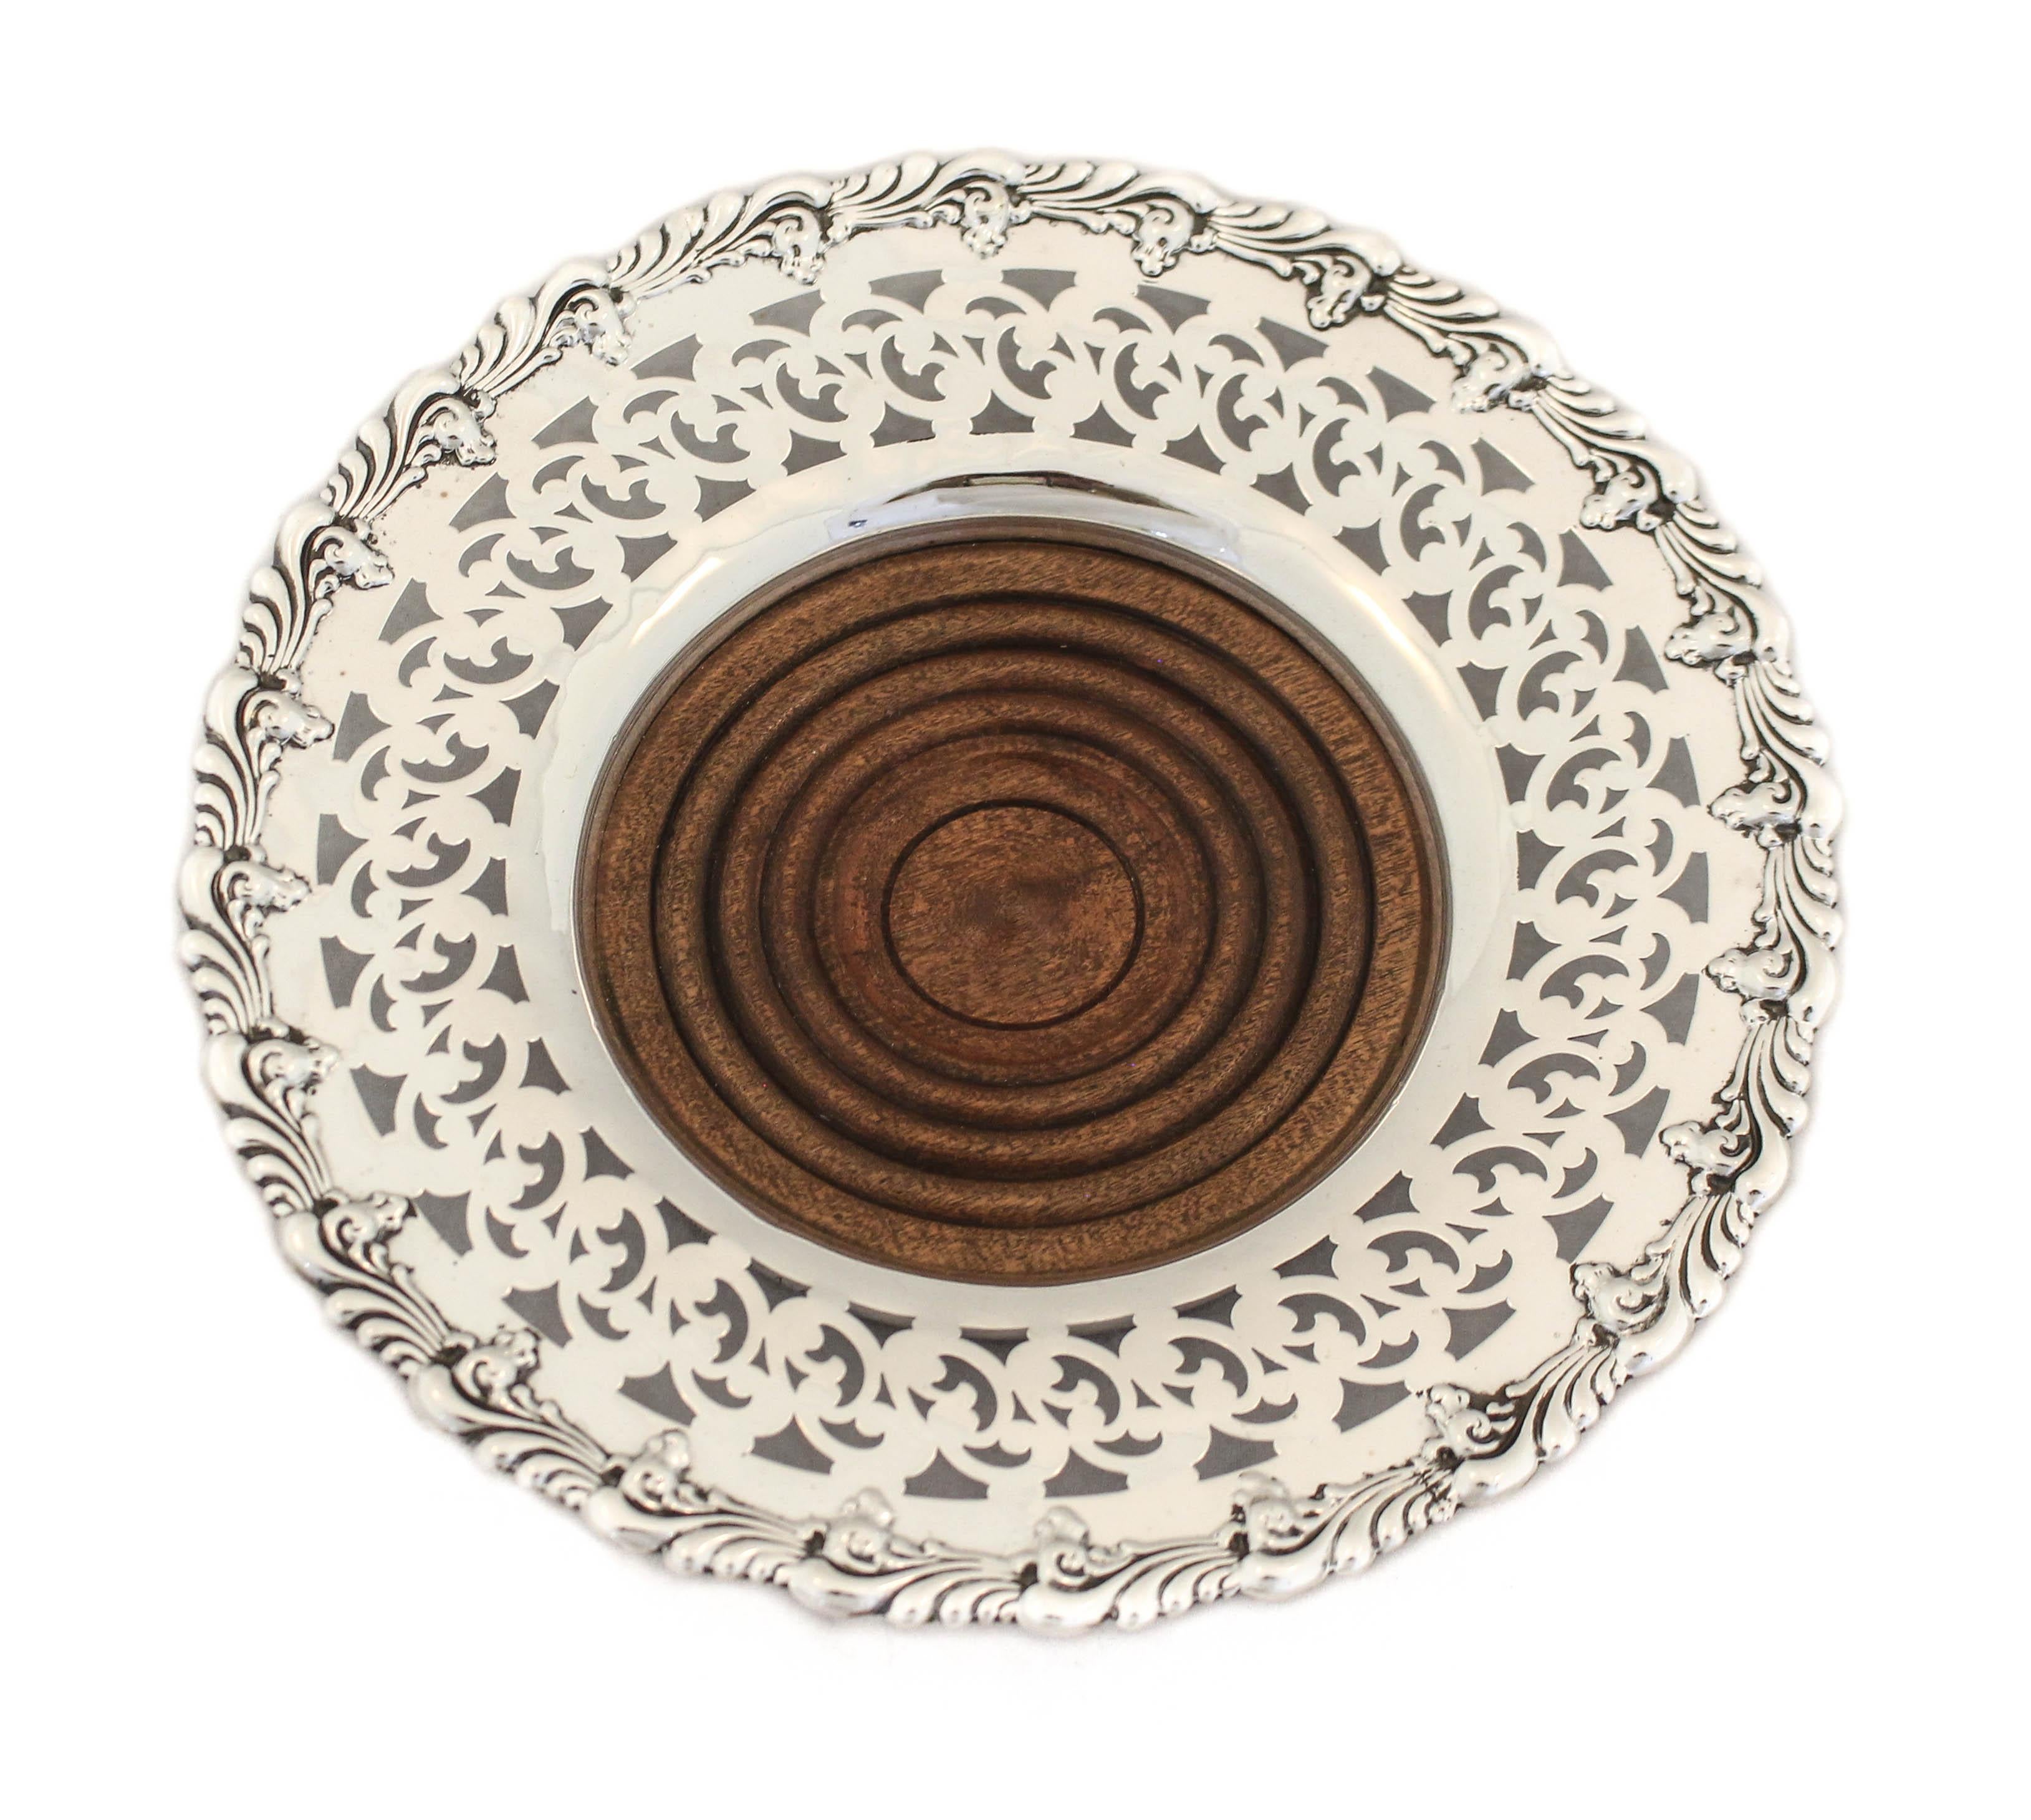 We are thrilled to offer you this pair of sterling silver wine coasters by Black Starr & Frost. They have a 2.5” sterling silver rim that has a scalloped edge and a reticulated pattern. The center is wood that is stained a dark rich brown. On the